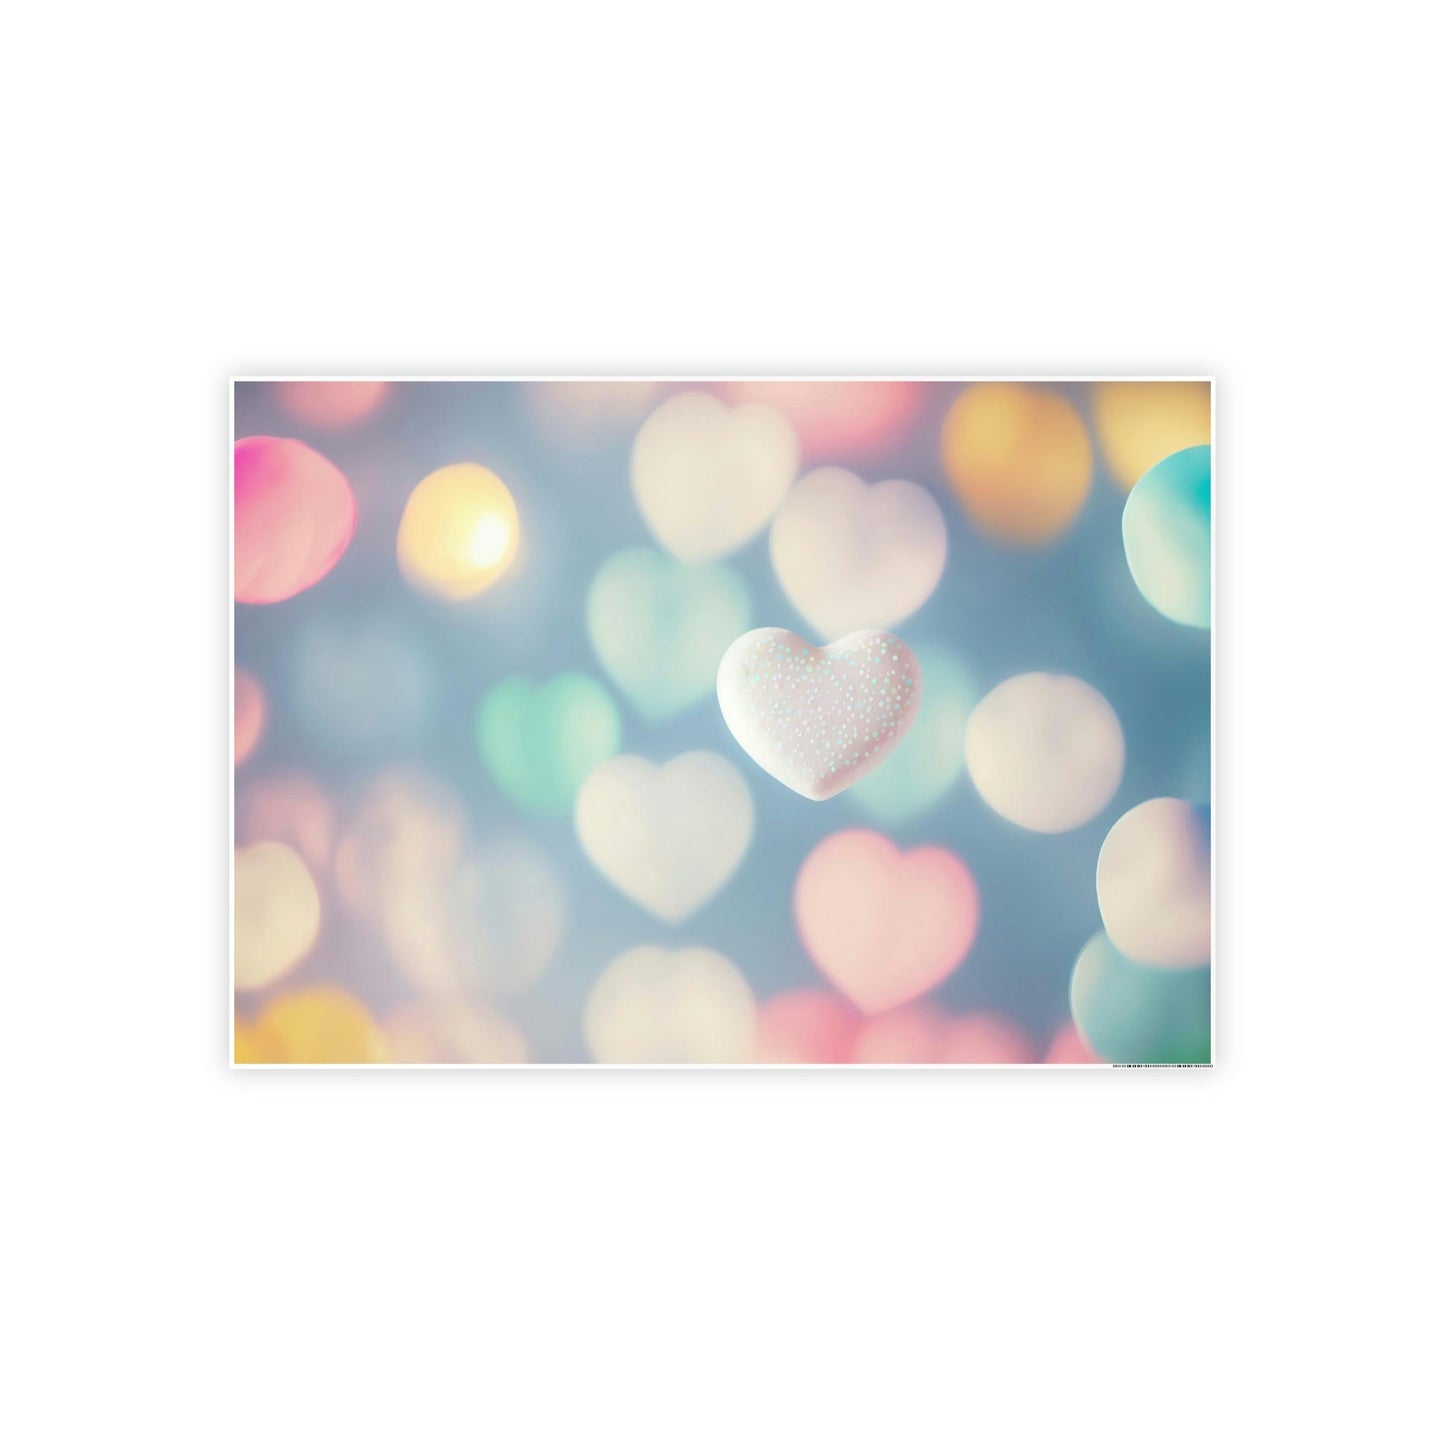 Love in Color: Canvas Print of a Vibrant Hearts on Framed Canvas